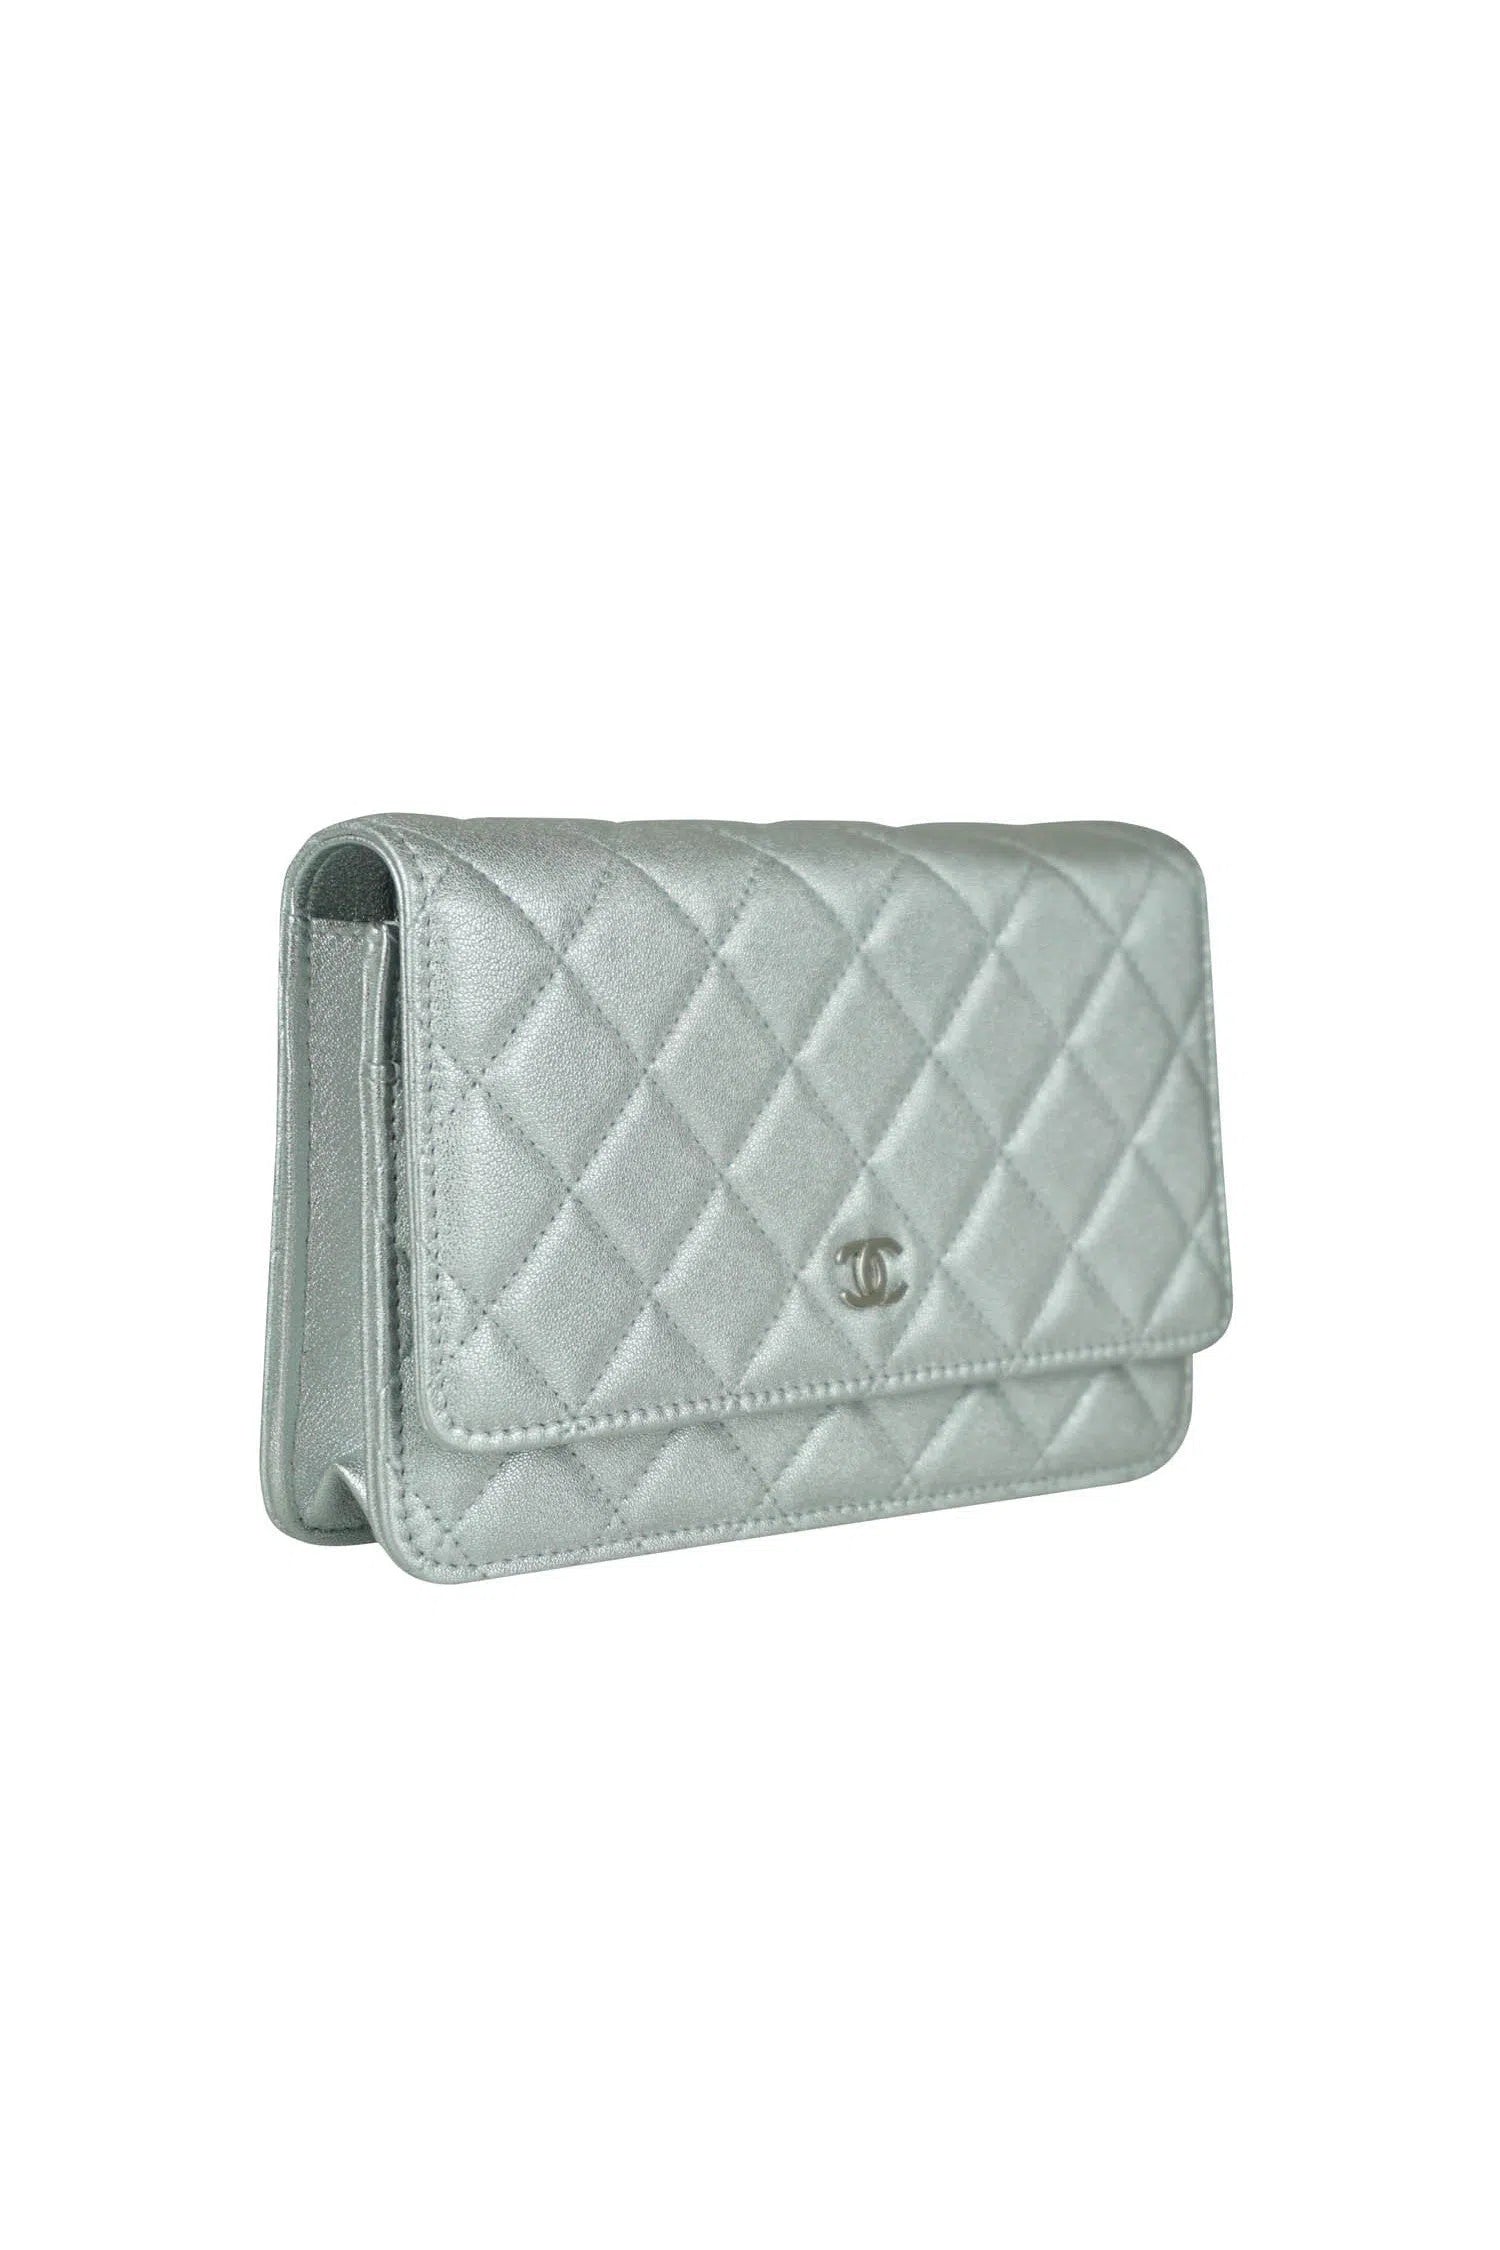 Chanel Classic Silver WOC Wallet on a Chain Purse 2021